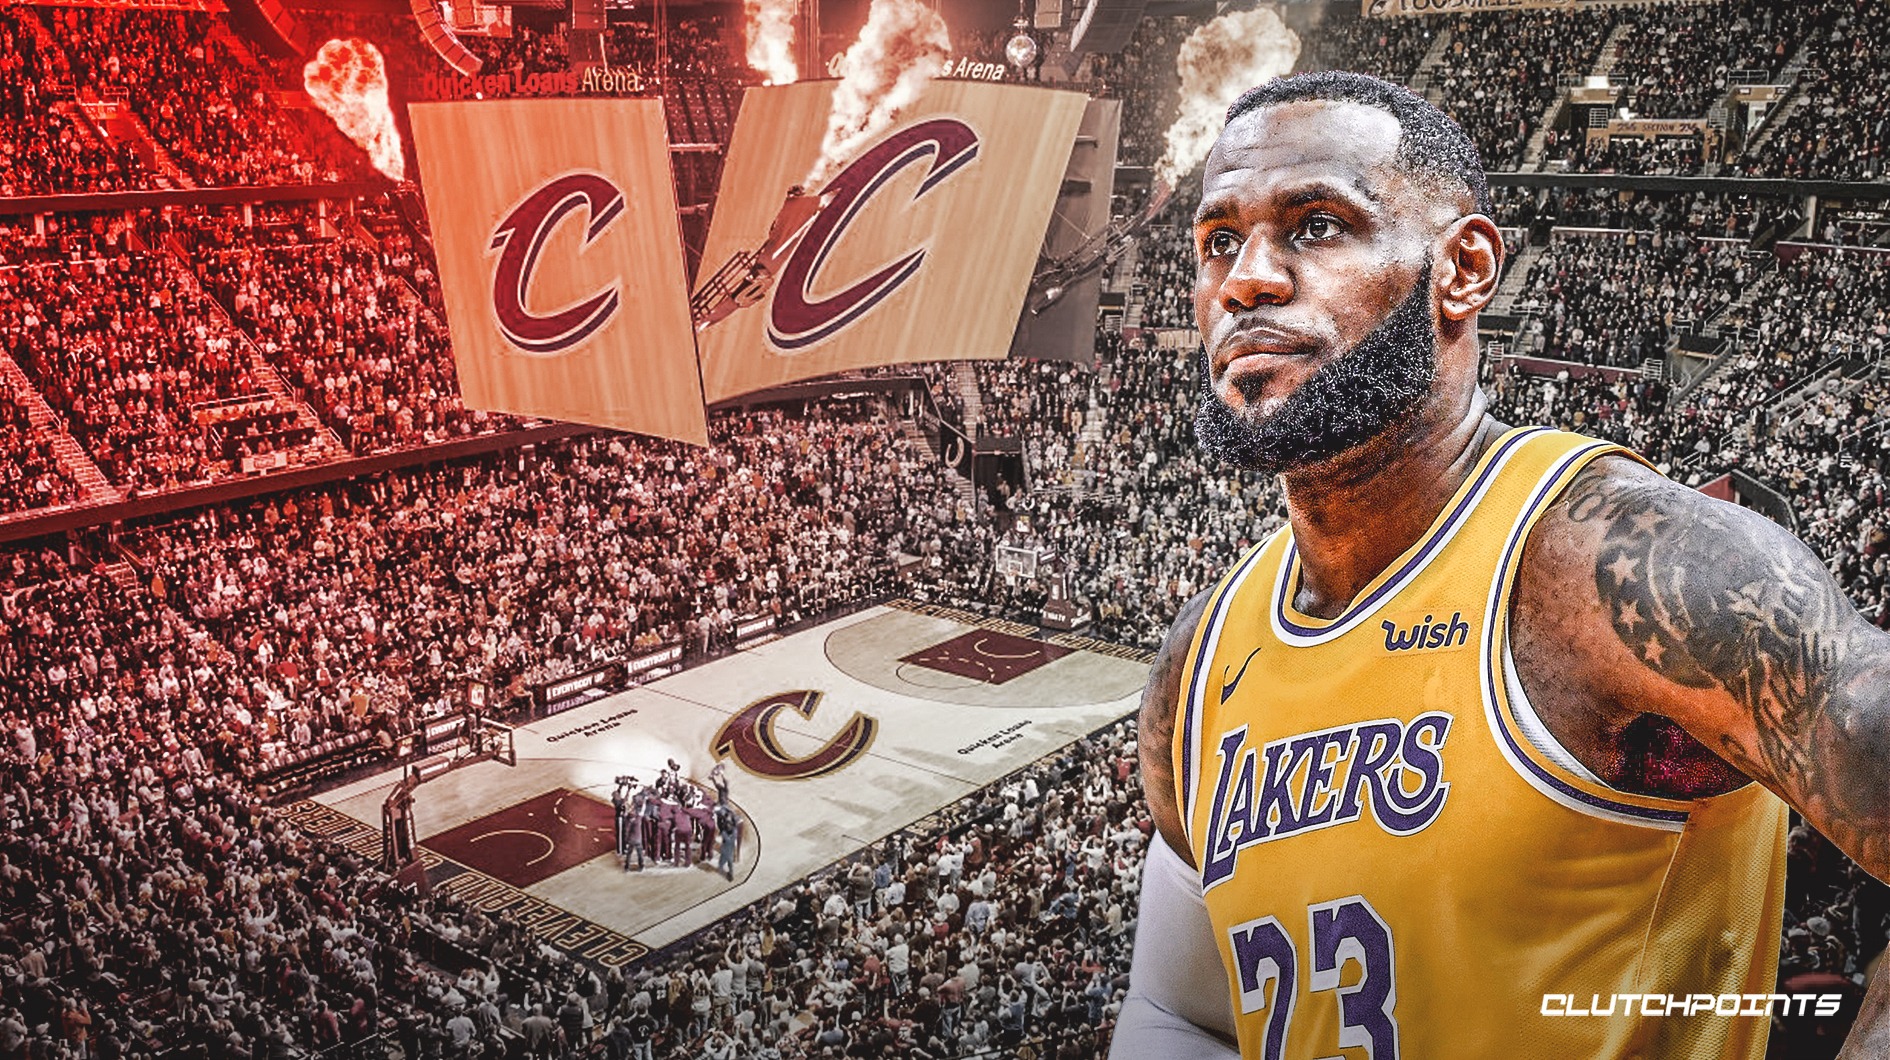 Cavs news: LeBron James returns to Cleveland to take on Cavs on March 26